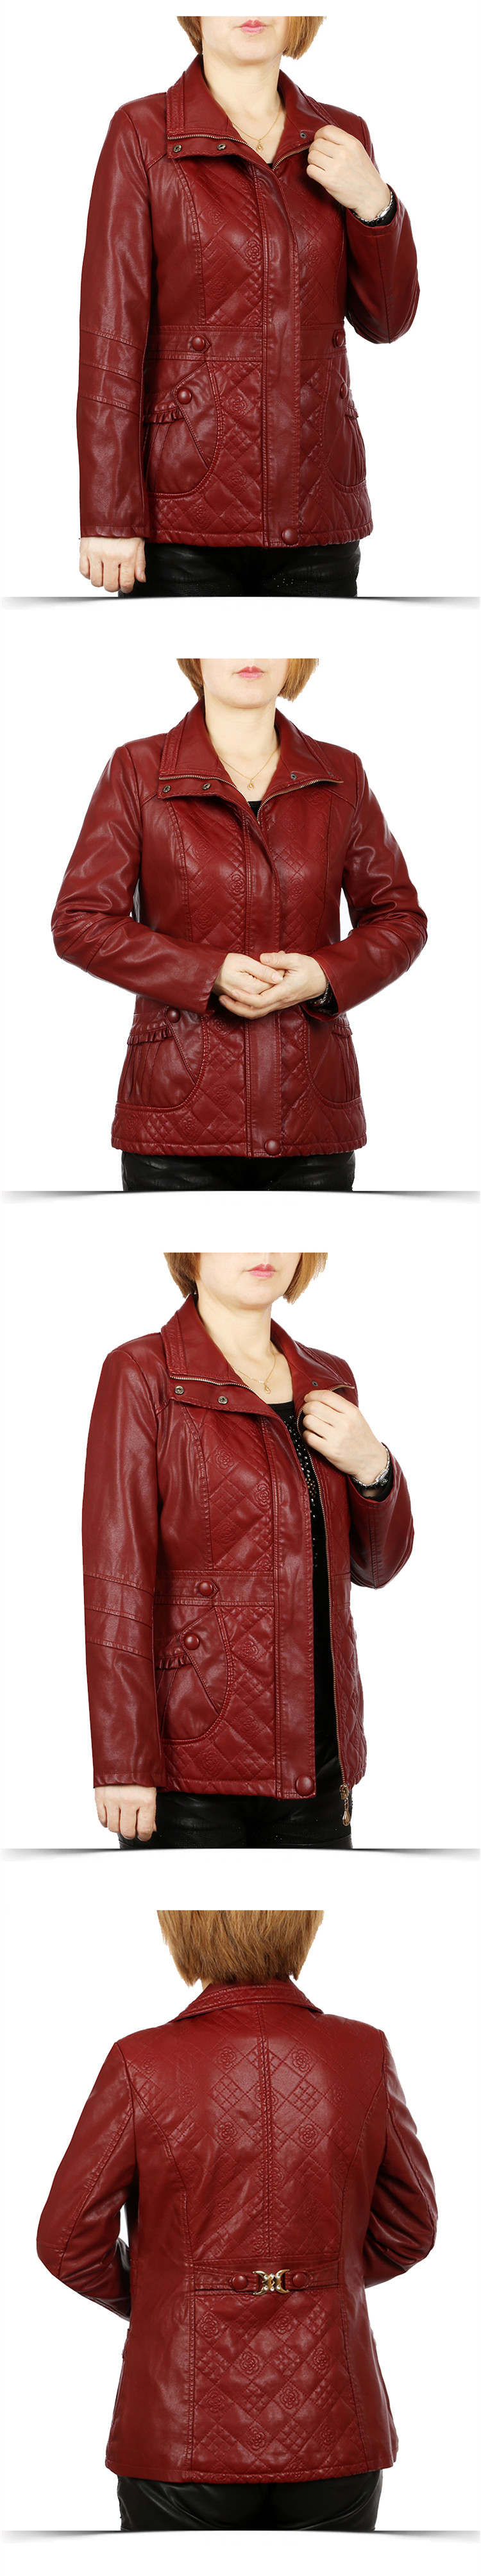 3XL-6XL-Pu-Leather-Jacket-Women-Square-Collar-Zipper-Middle-aged-Mothers-Clothes-Plus-Size-Solid-Coa-32706883587